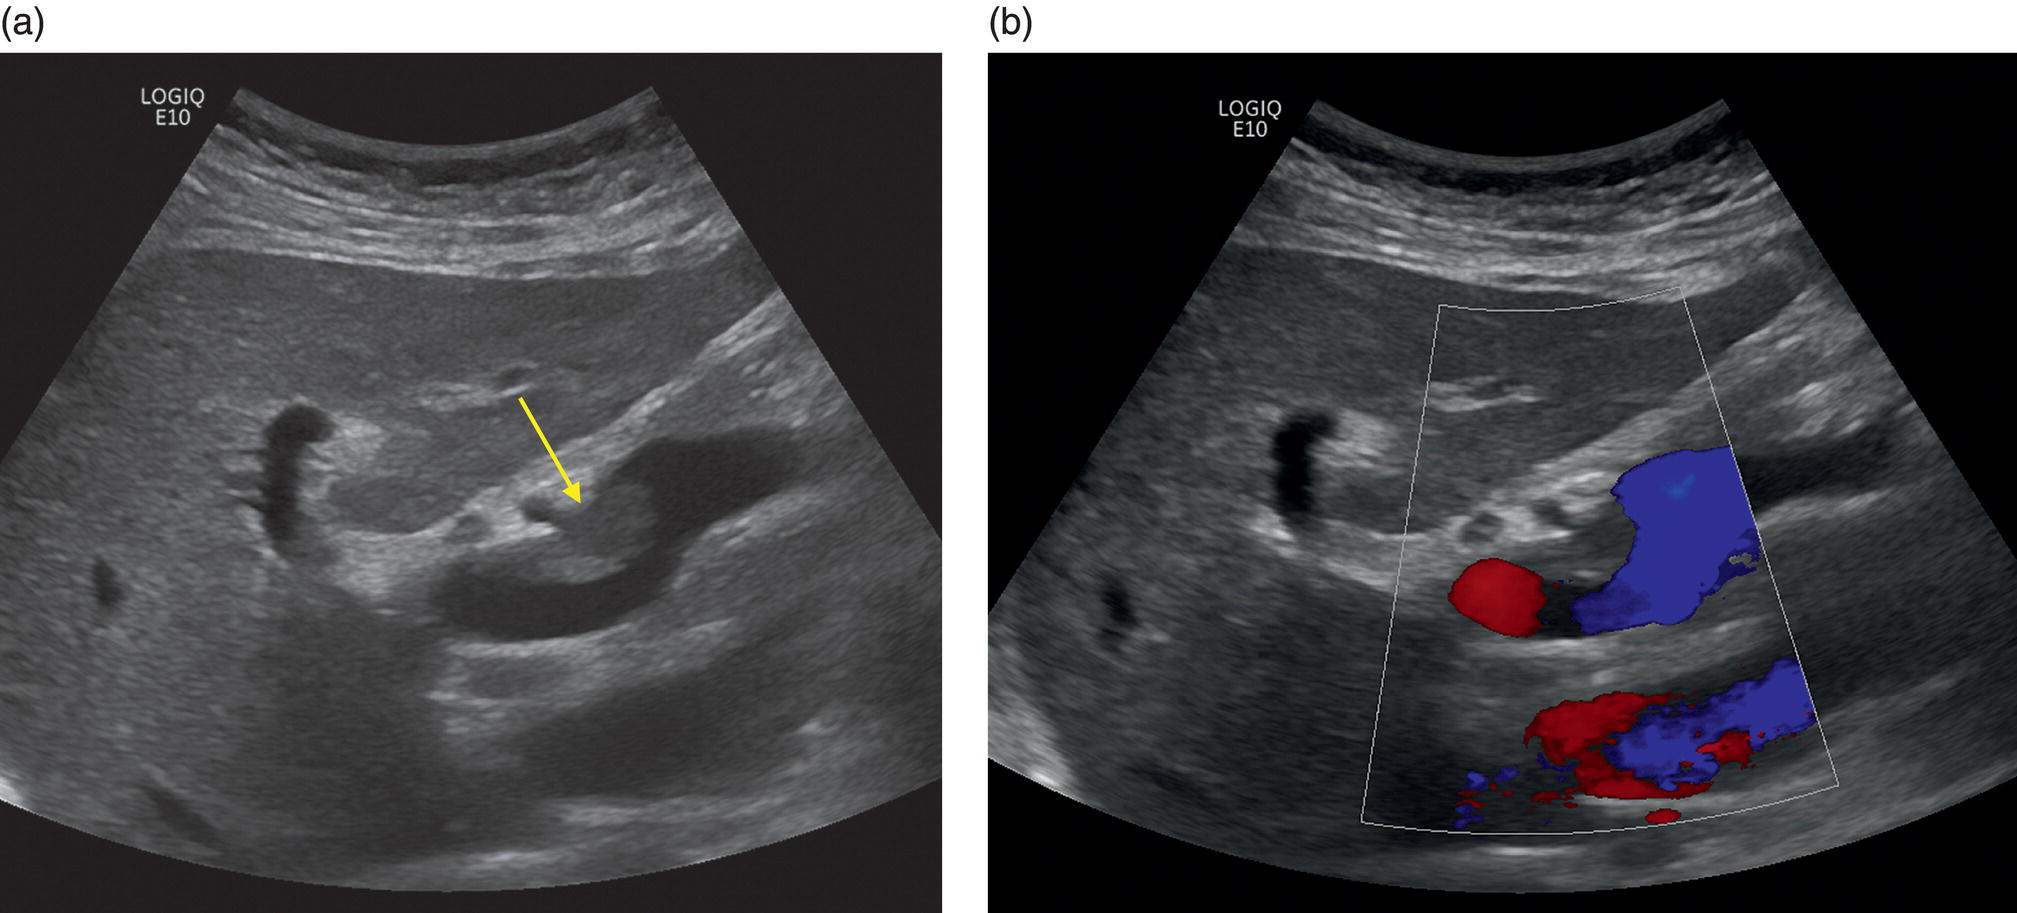 A set of two ultrasounds of a patient affected by partial portal vein thrombosis without cirrhosis. A. There is clot formation denoted by the arrow mark. B. Color Doppler exposes a flow in the lumen. The afflicted area is squared.